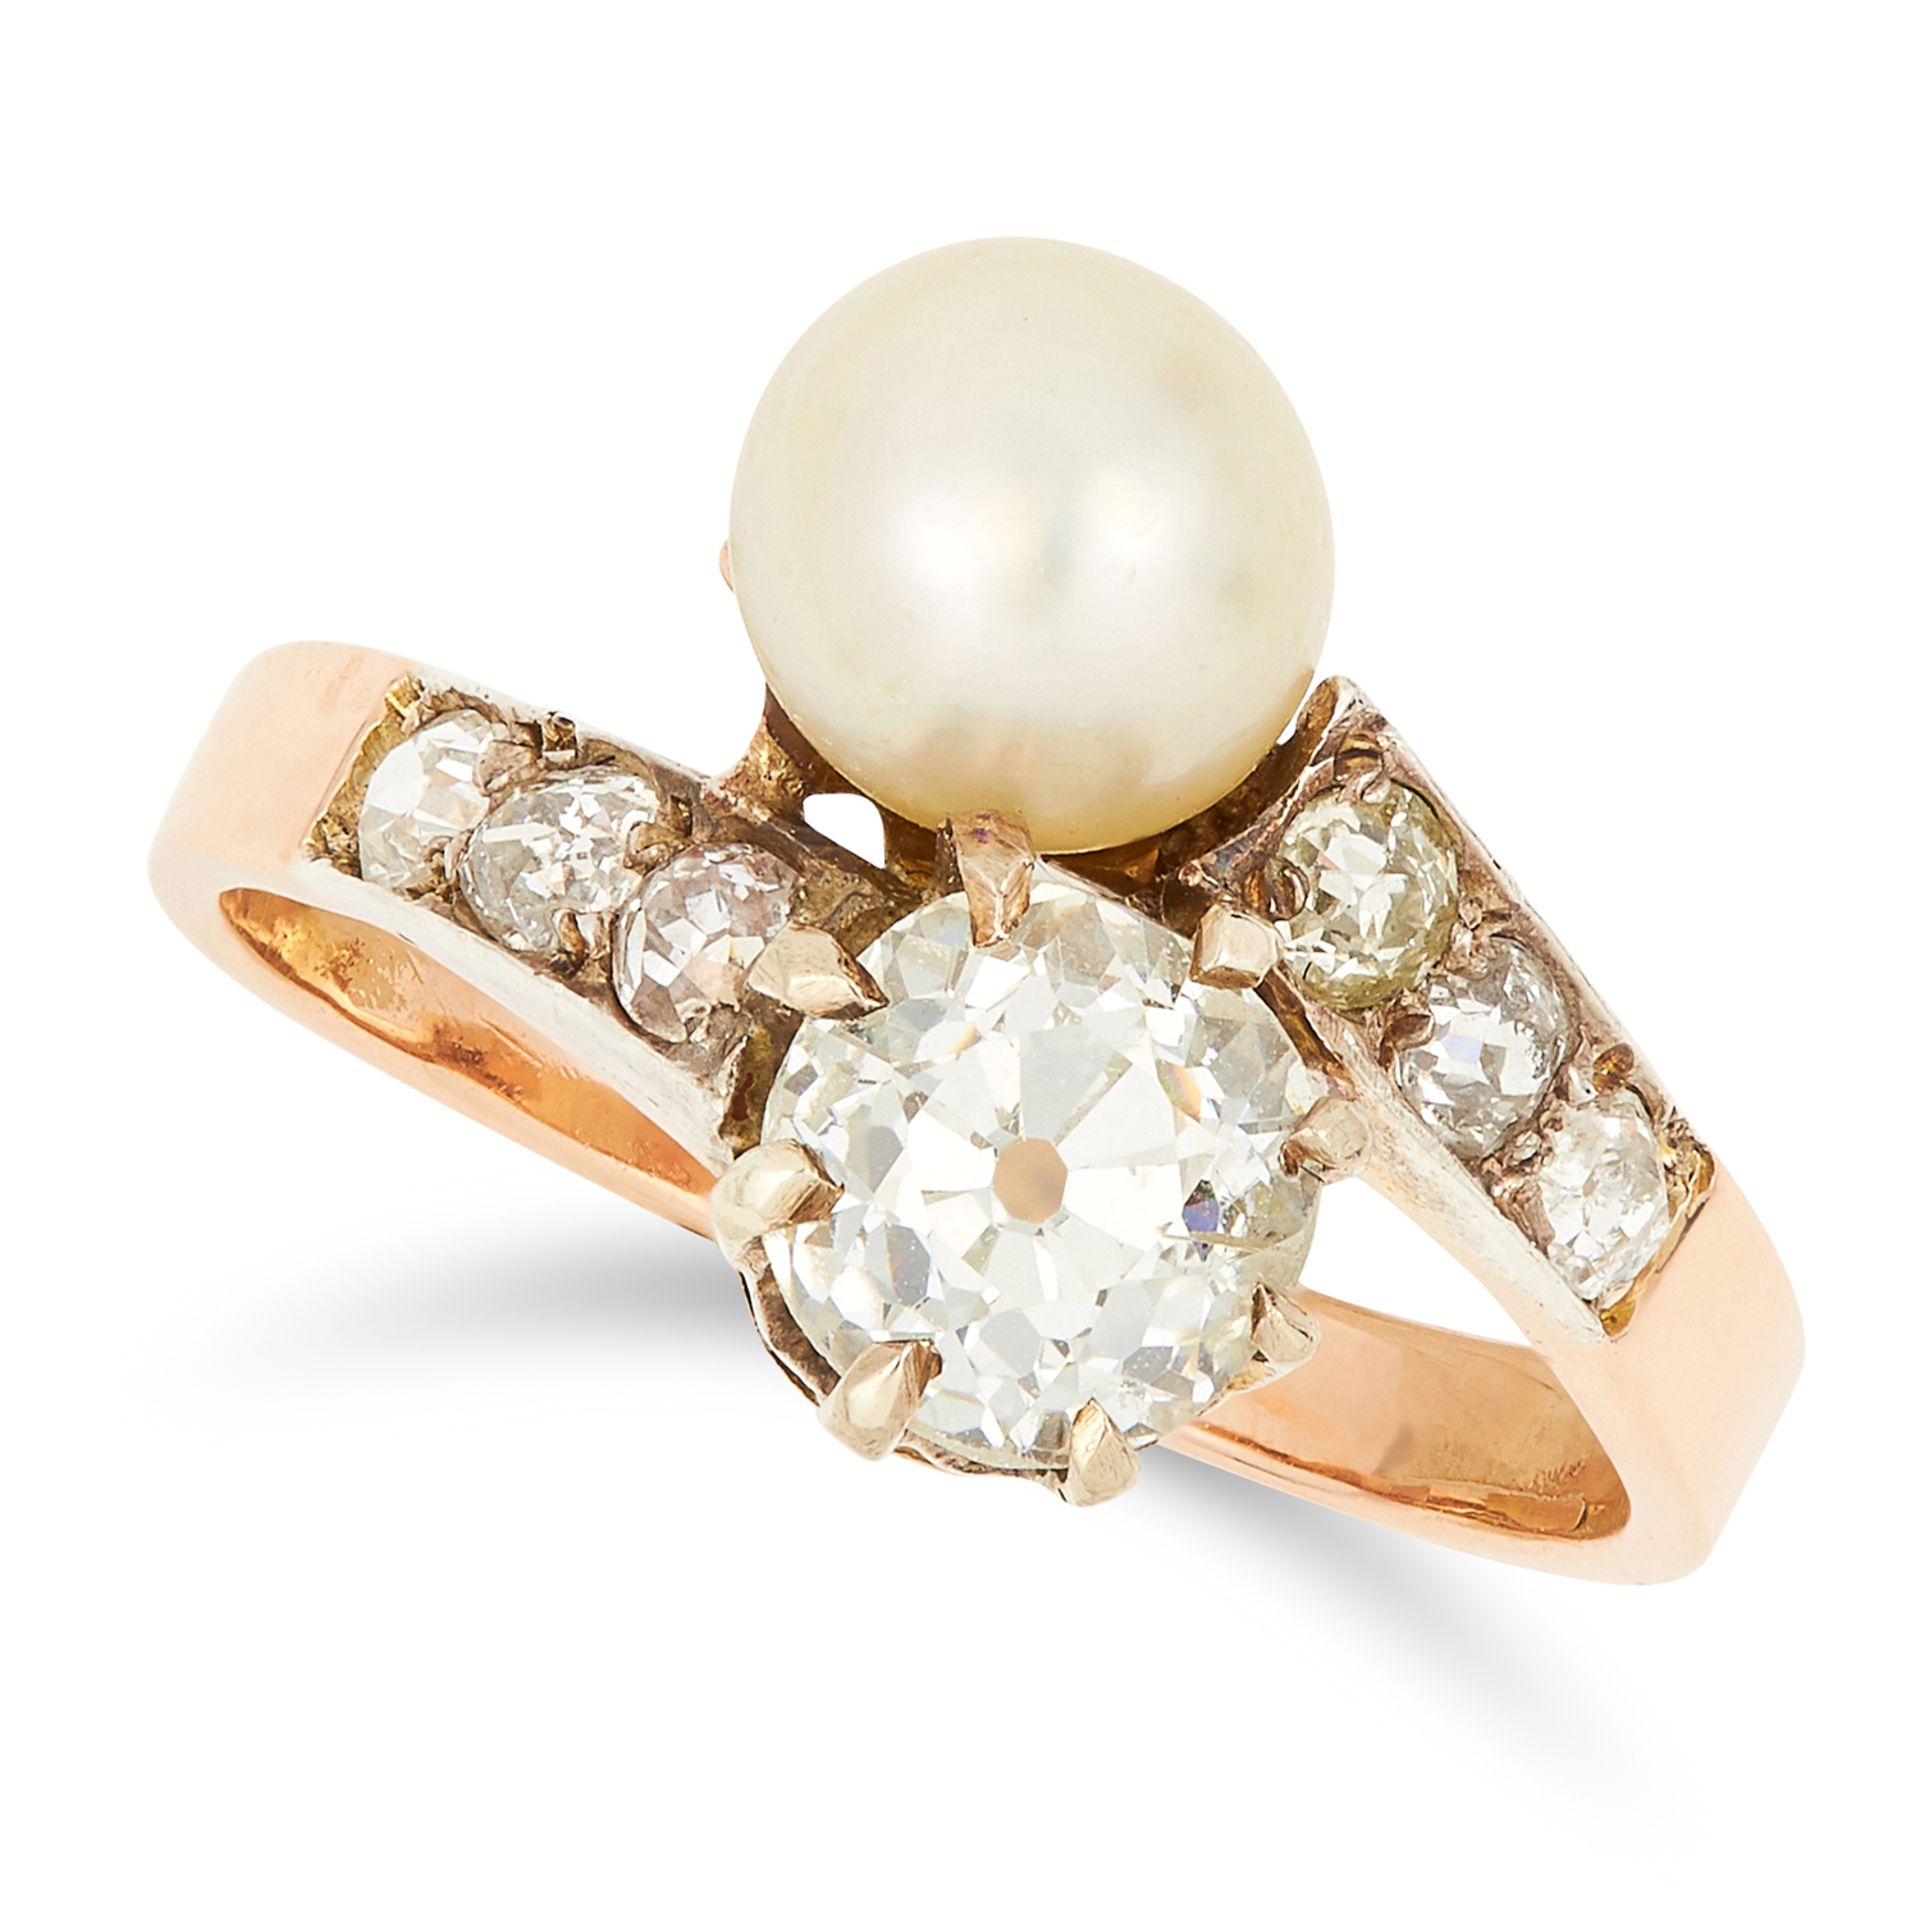 ANTIQUE PEARL AND DIAMOND TOI ET MOI RING set with an old cut diamond of 1.12 carats and a pearl